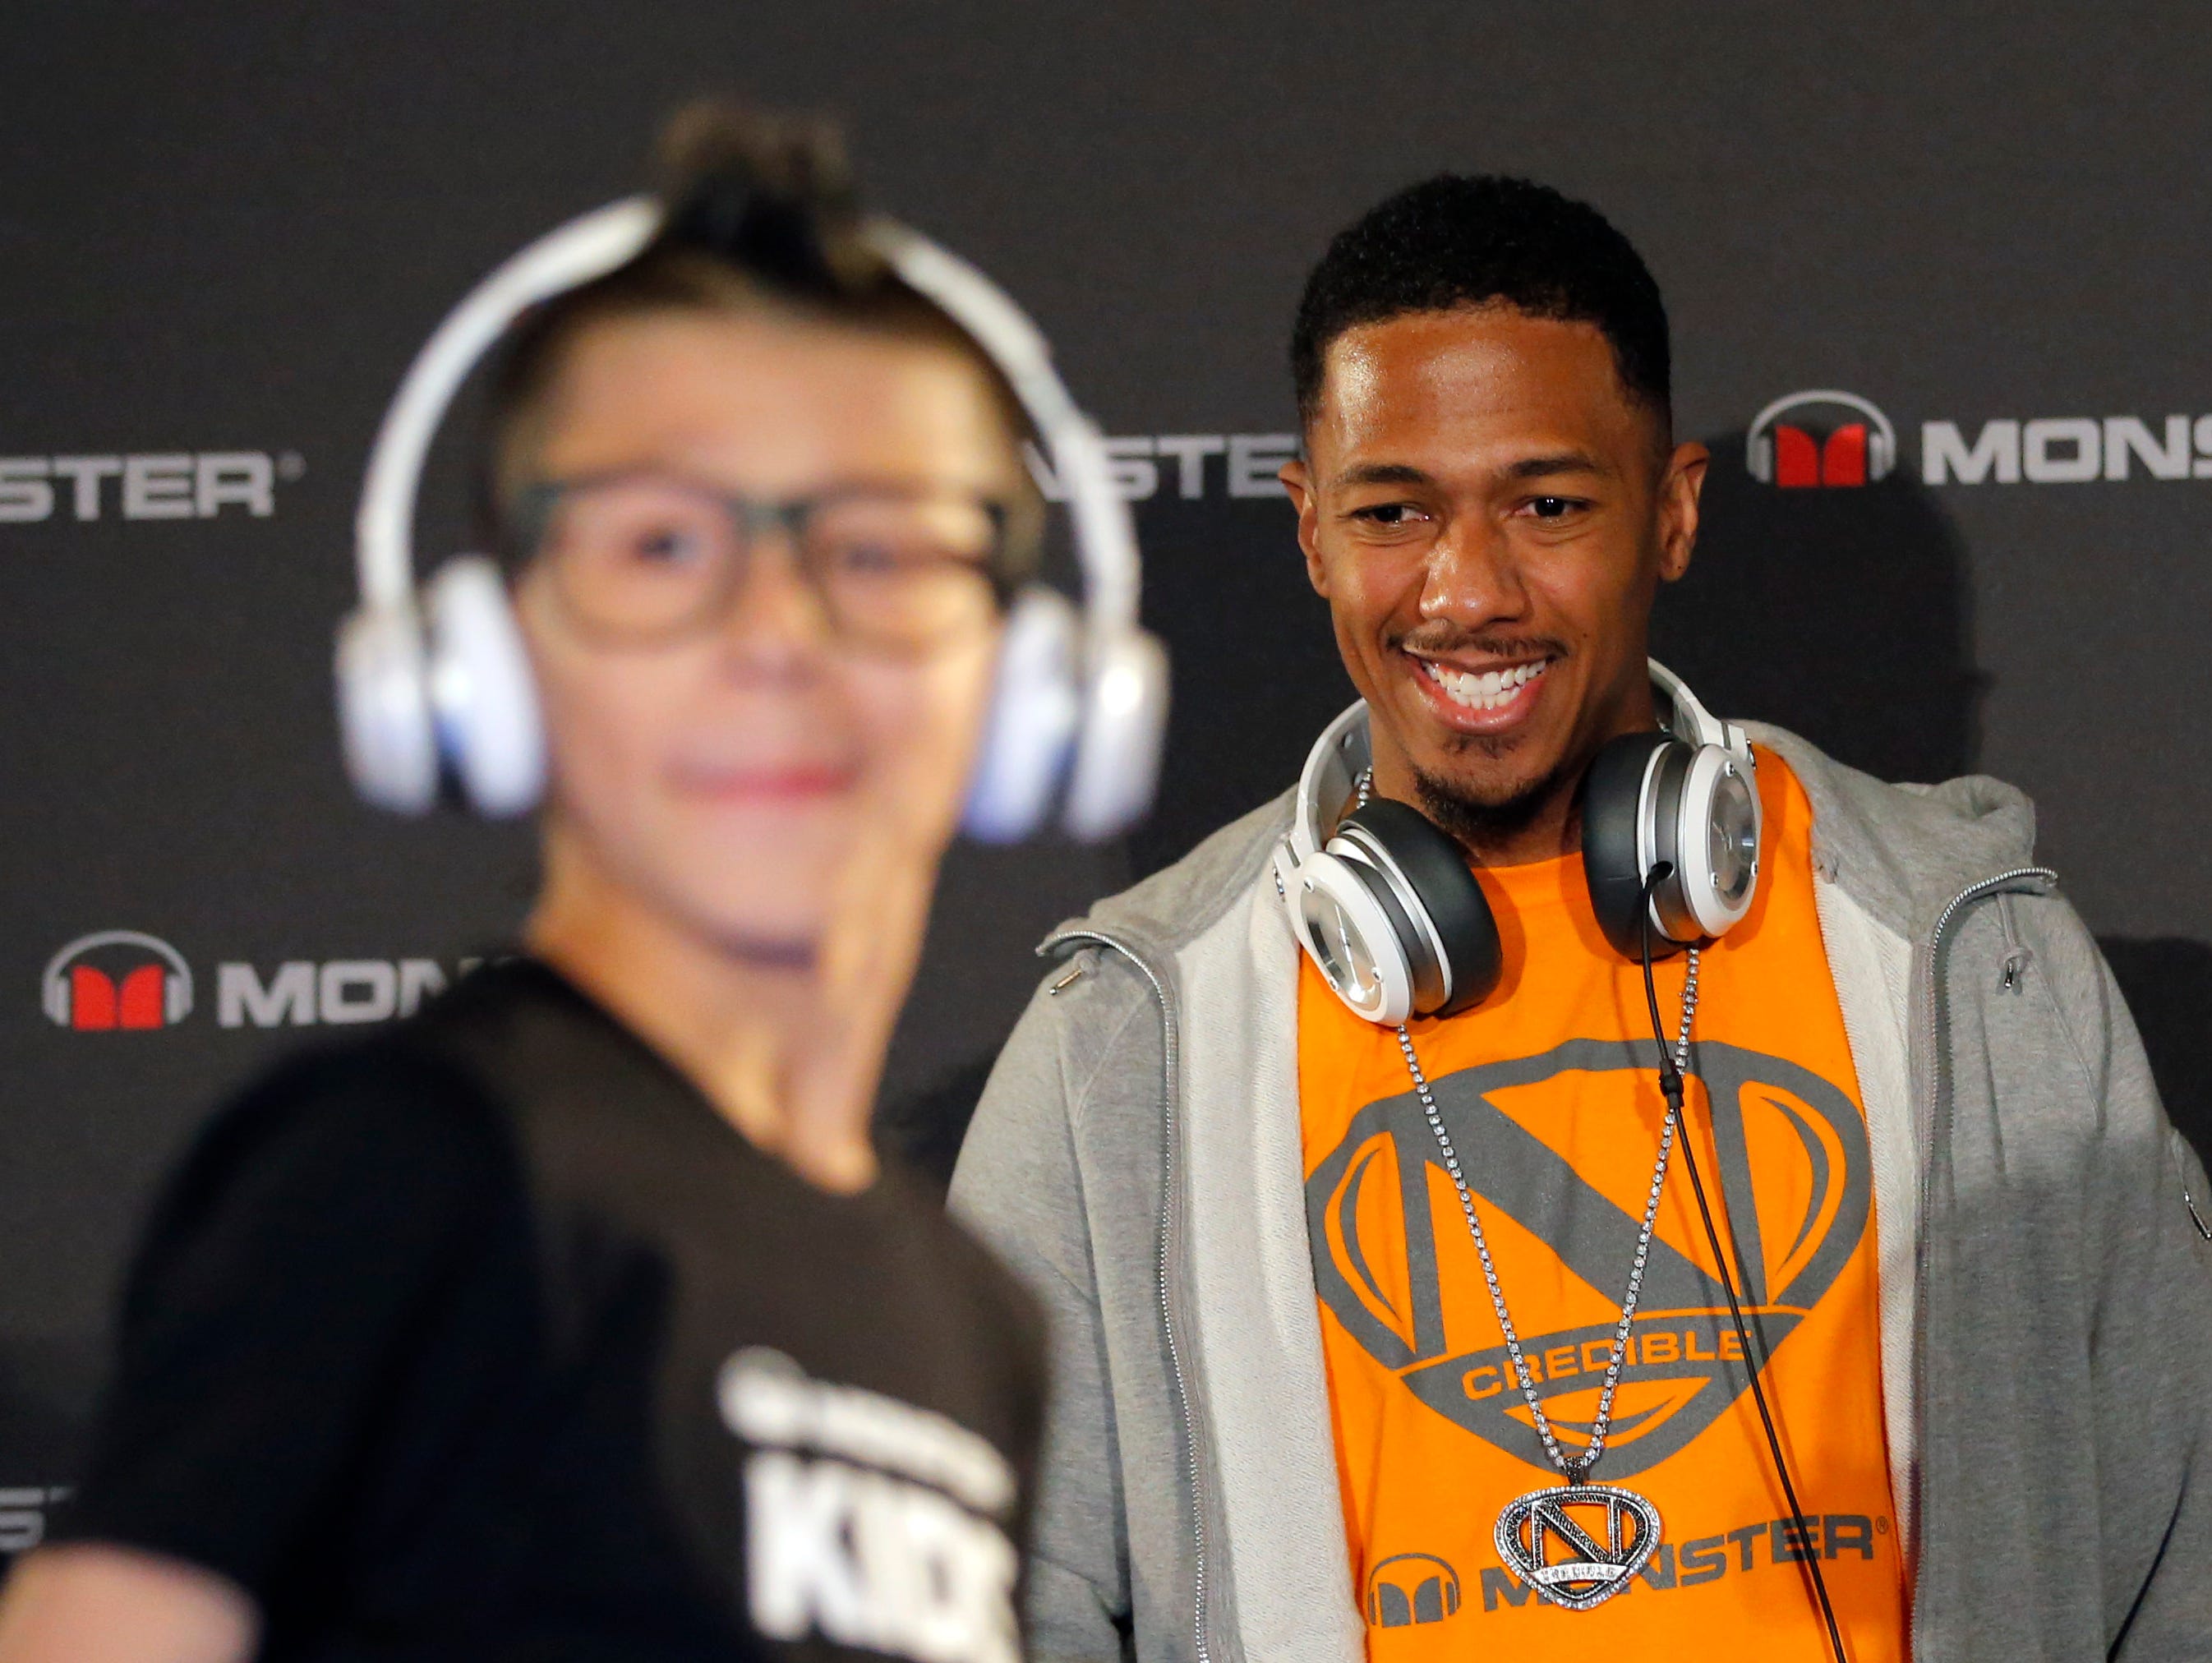 Recording artist Nick Cannon looks at a model wearing a new headphone by Monster during a new conference at the International Consumer Electronics Show in Las Vegas, Monday, Jan. 7, 2013.